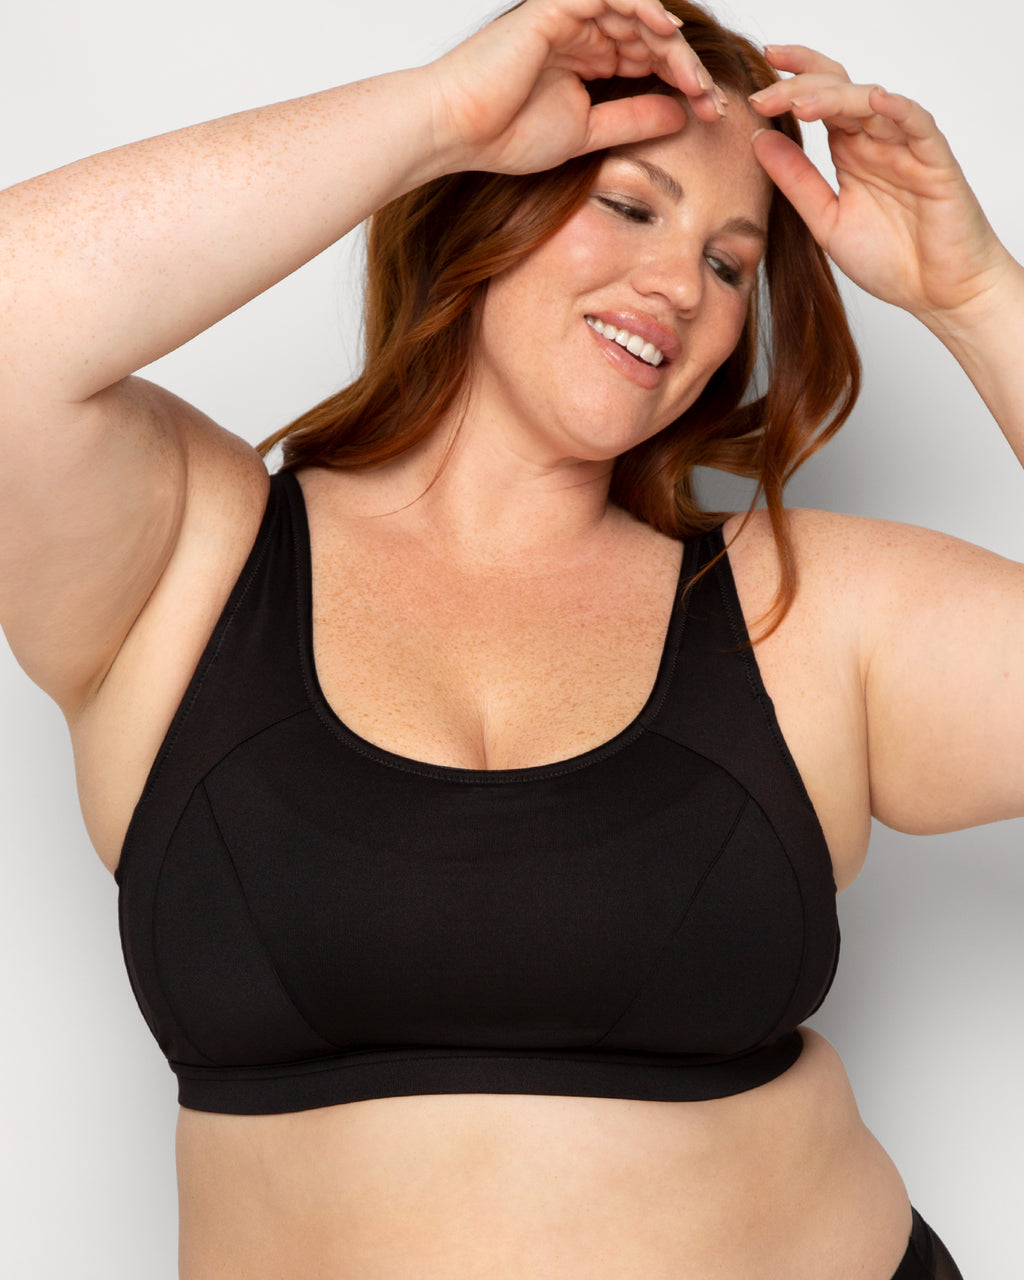 Curvy Couture Plus Size Women Support Large Bust, Perfect Workout, High  Impact Sports Bra, Black Hue, Medium at  Women's Clothing store